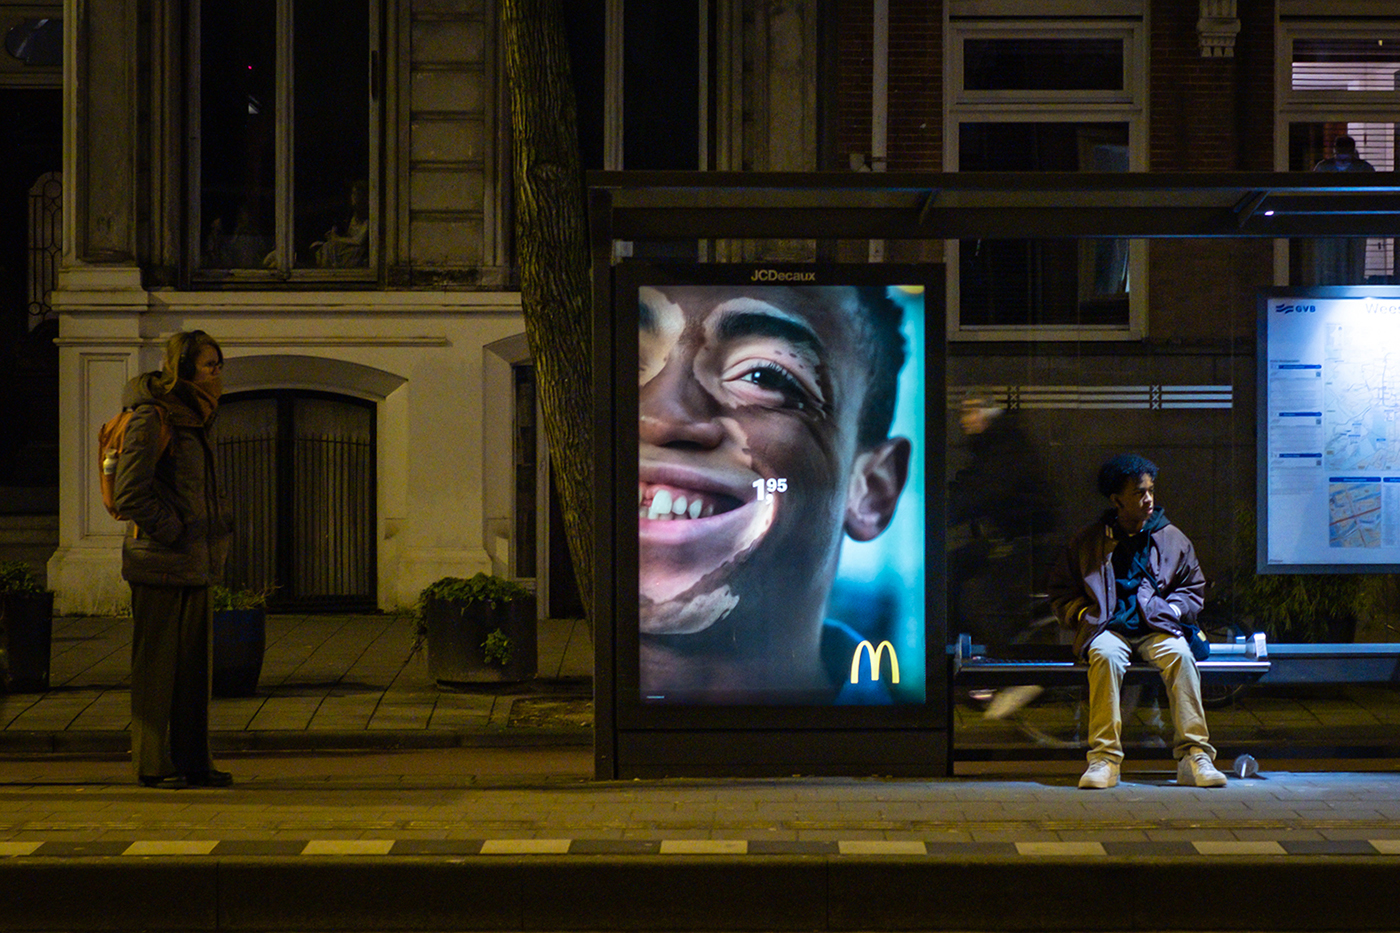 McDonald's - Prices That Make You Happy, by TBWA Neboko